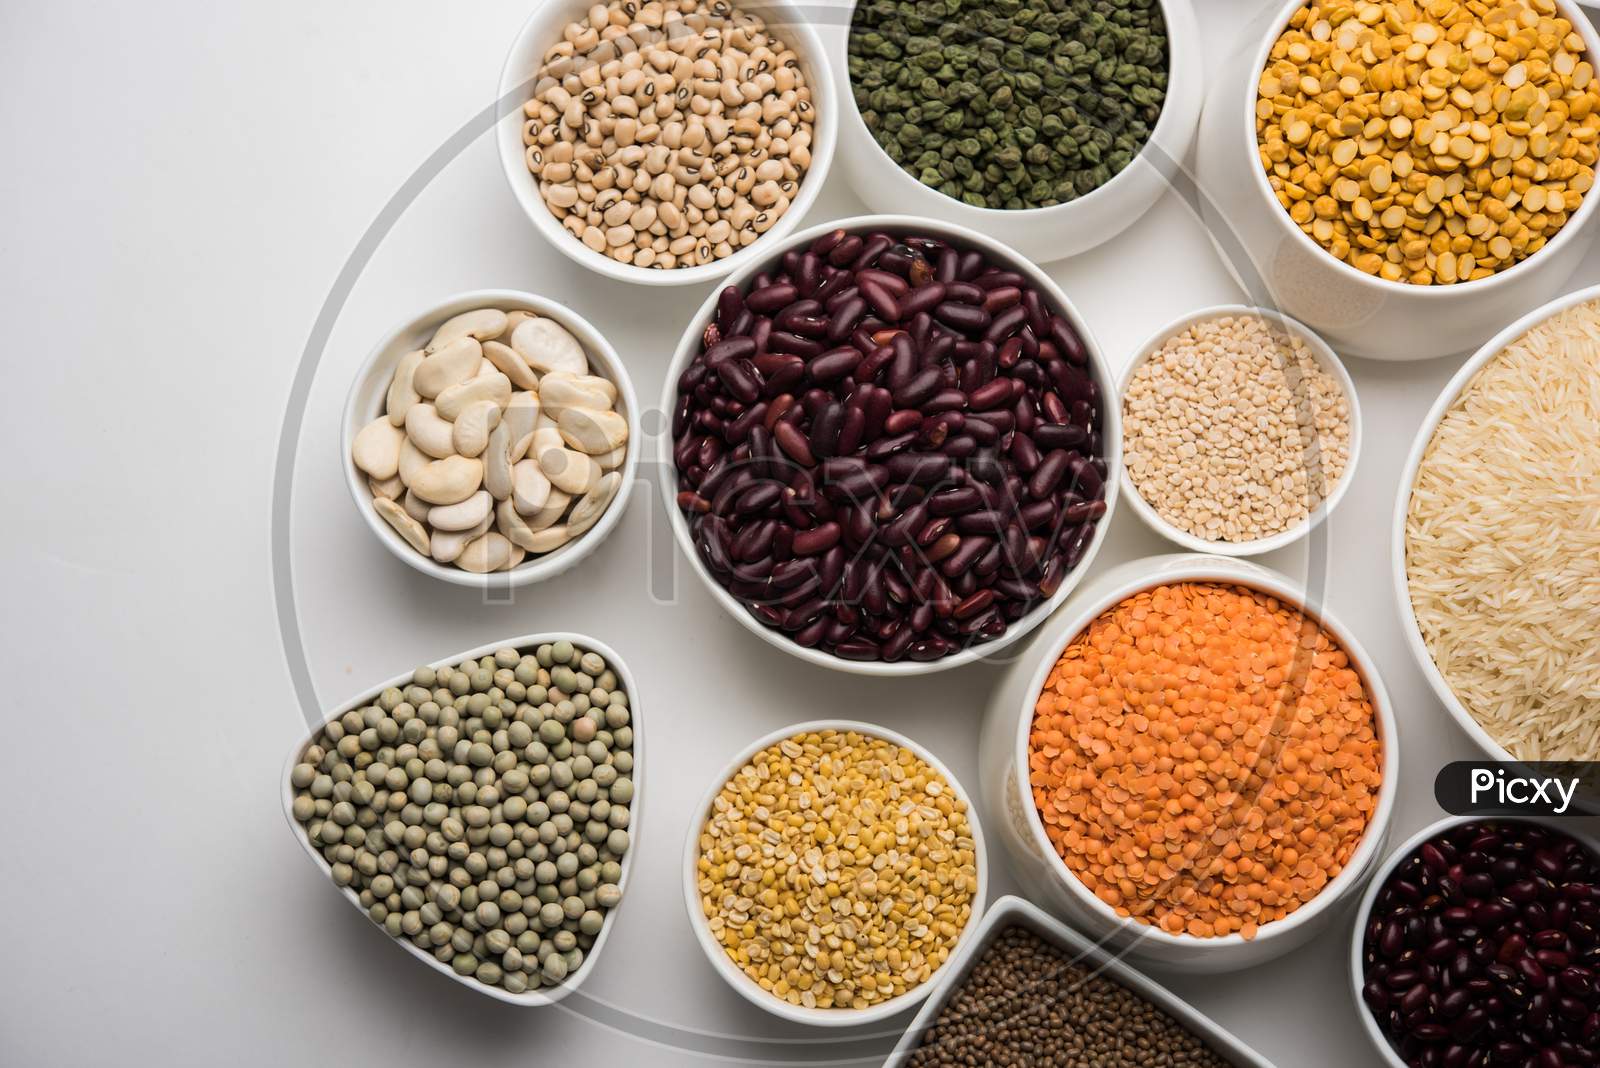 Uncooked pulses,grains and seeds in White bowls